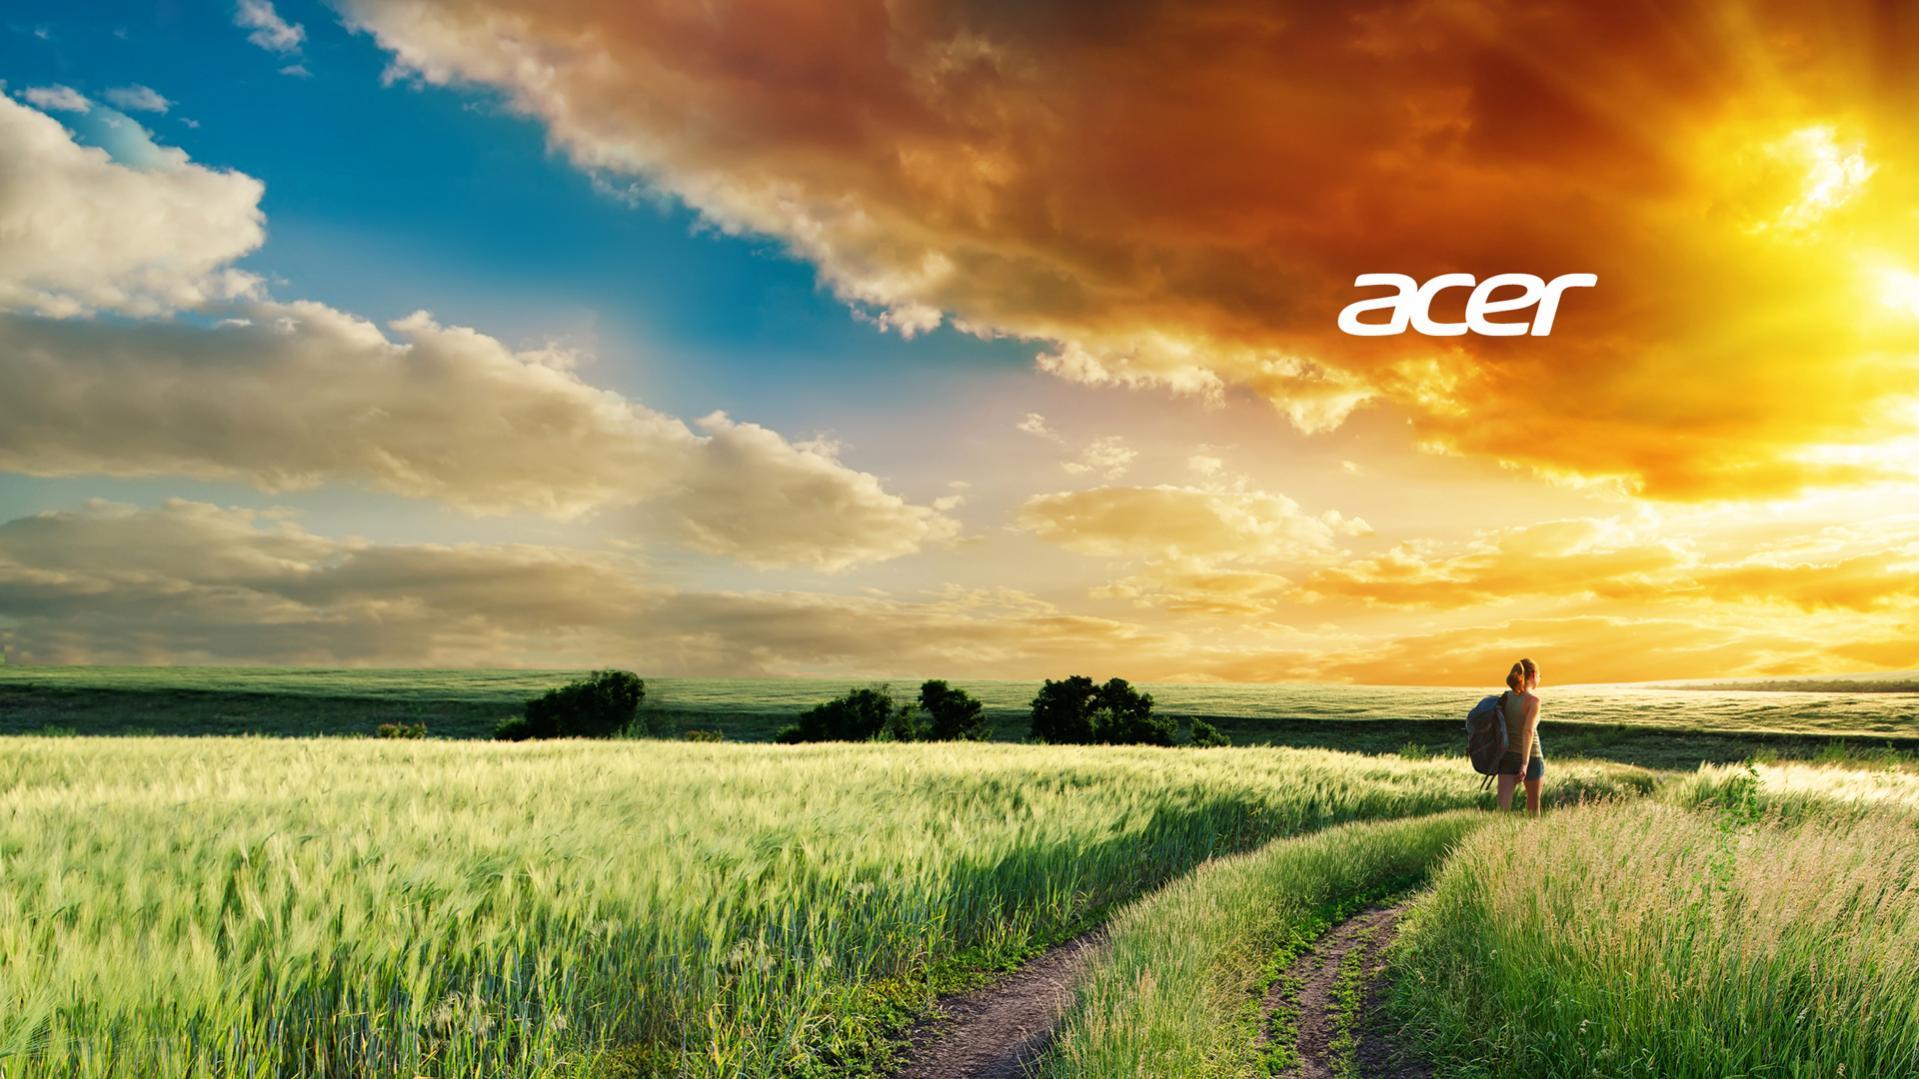 Acer Aspire Wallpapers HD - Wallpaper Cave